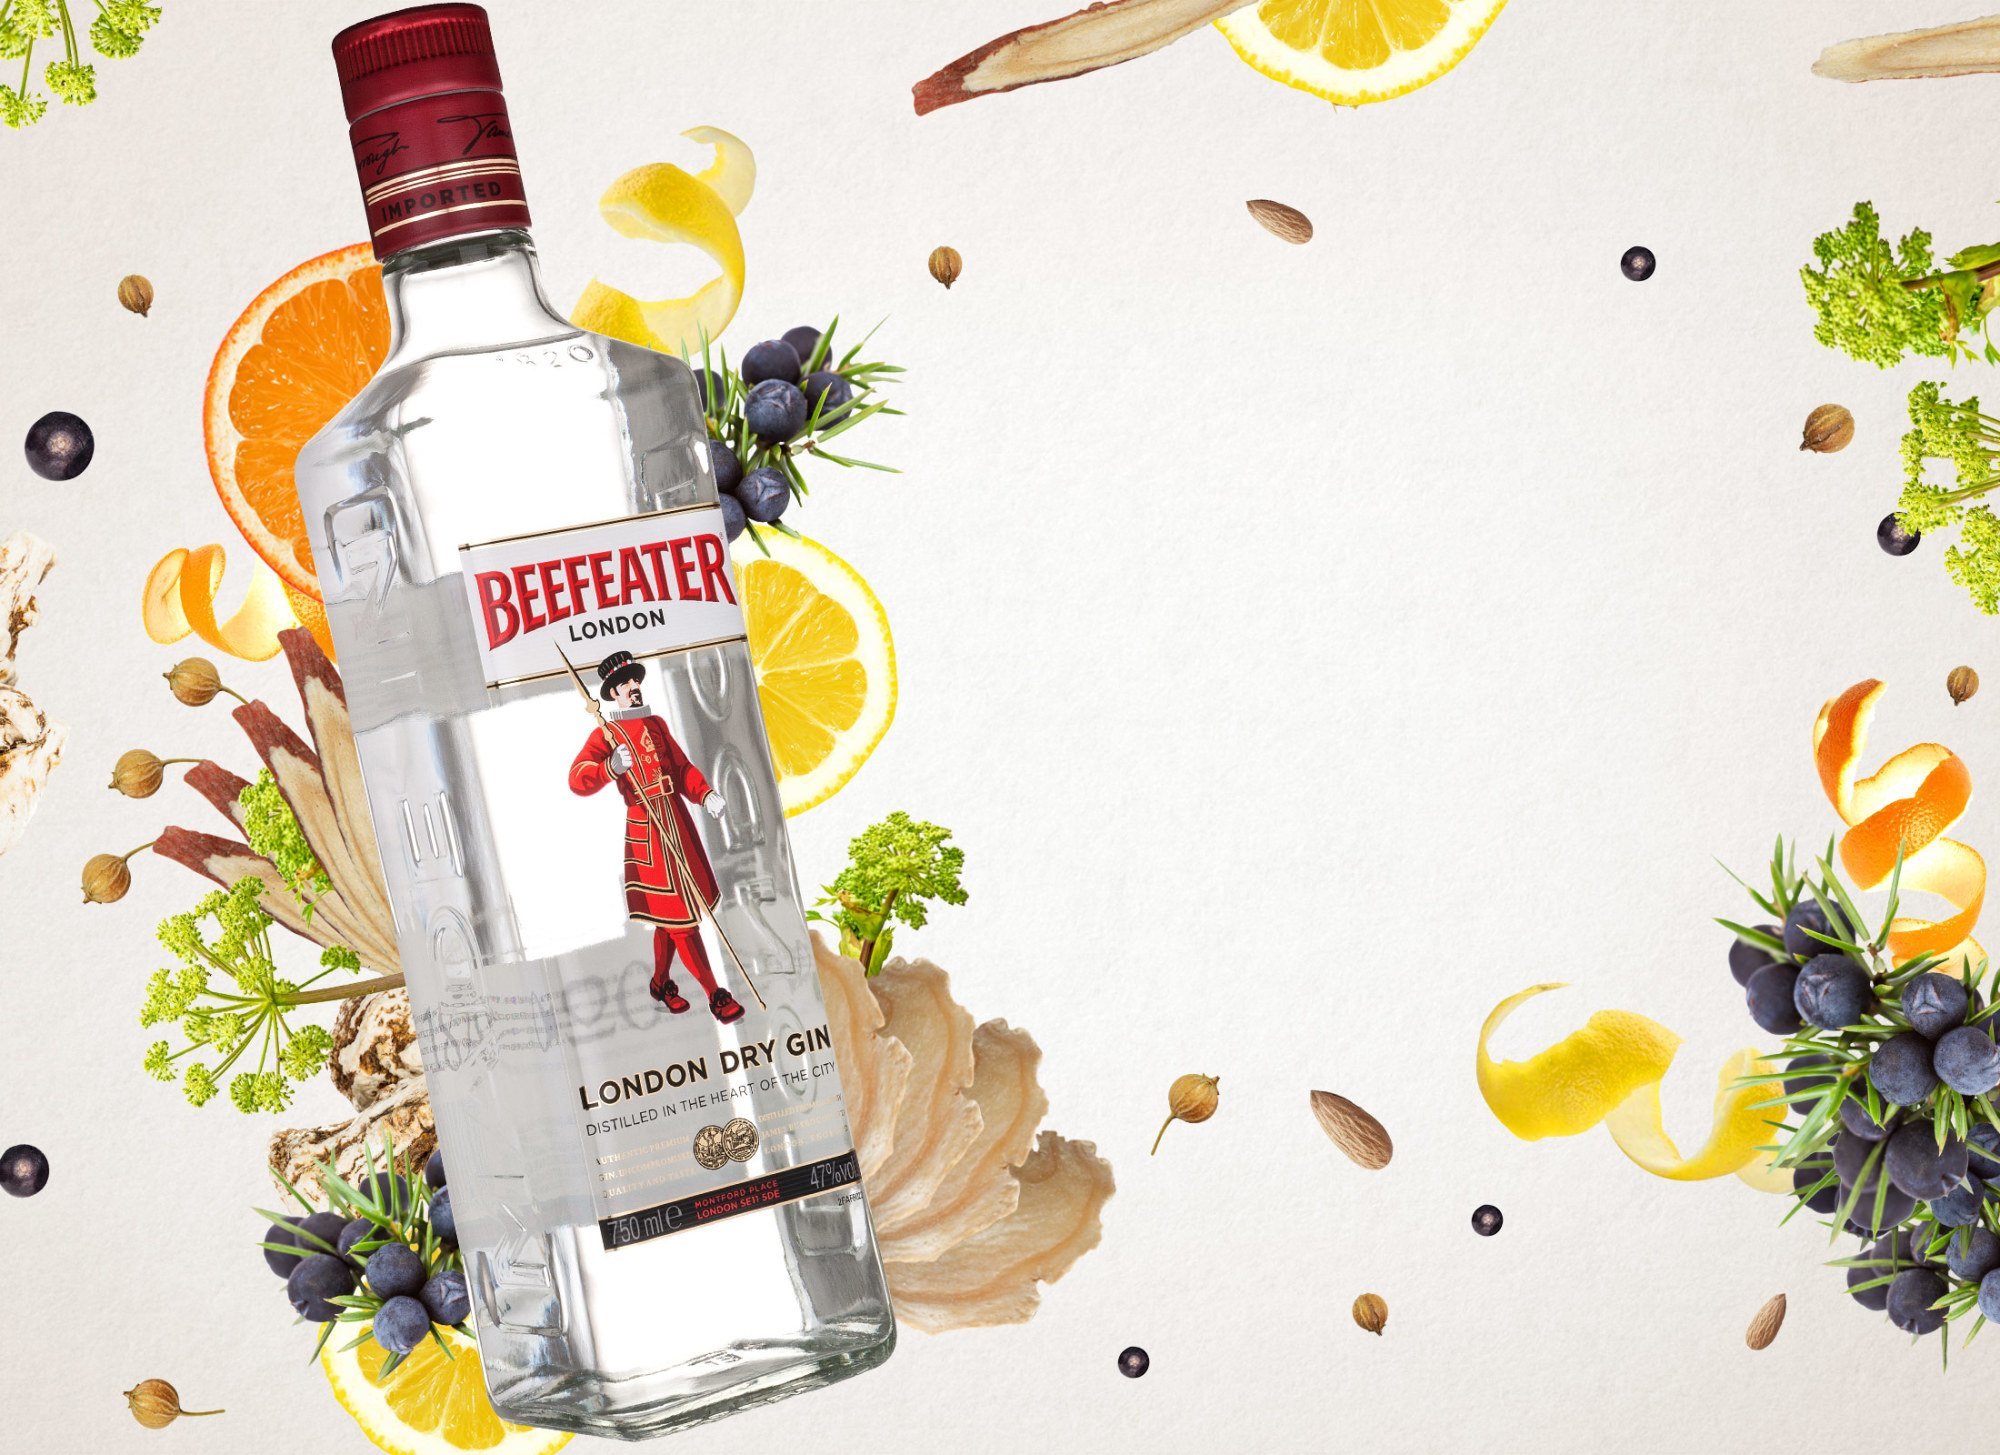 History Beefeater Dry Gin